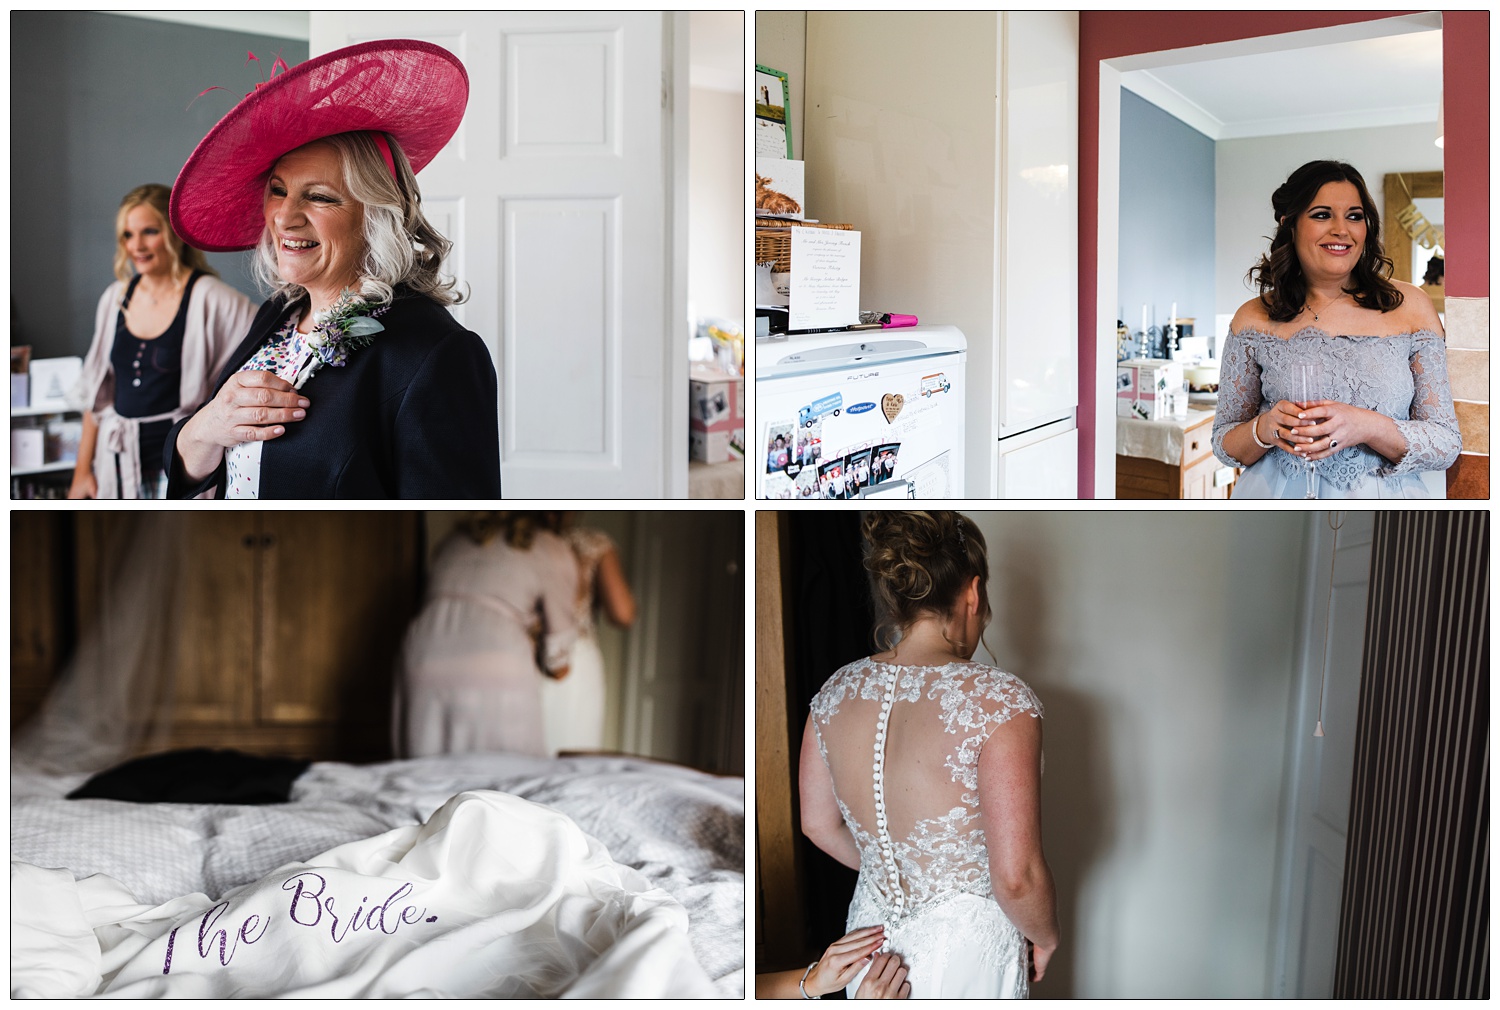 Some natural moments around the house as a bride gets ready for her wedding with family and friends.